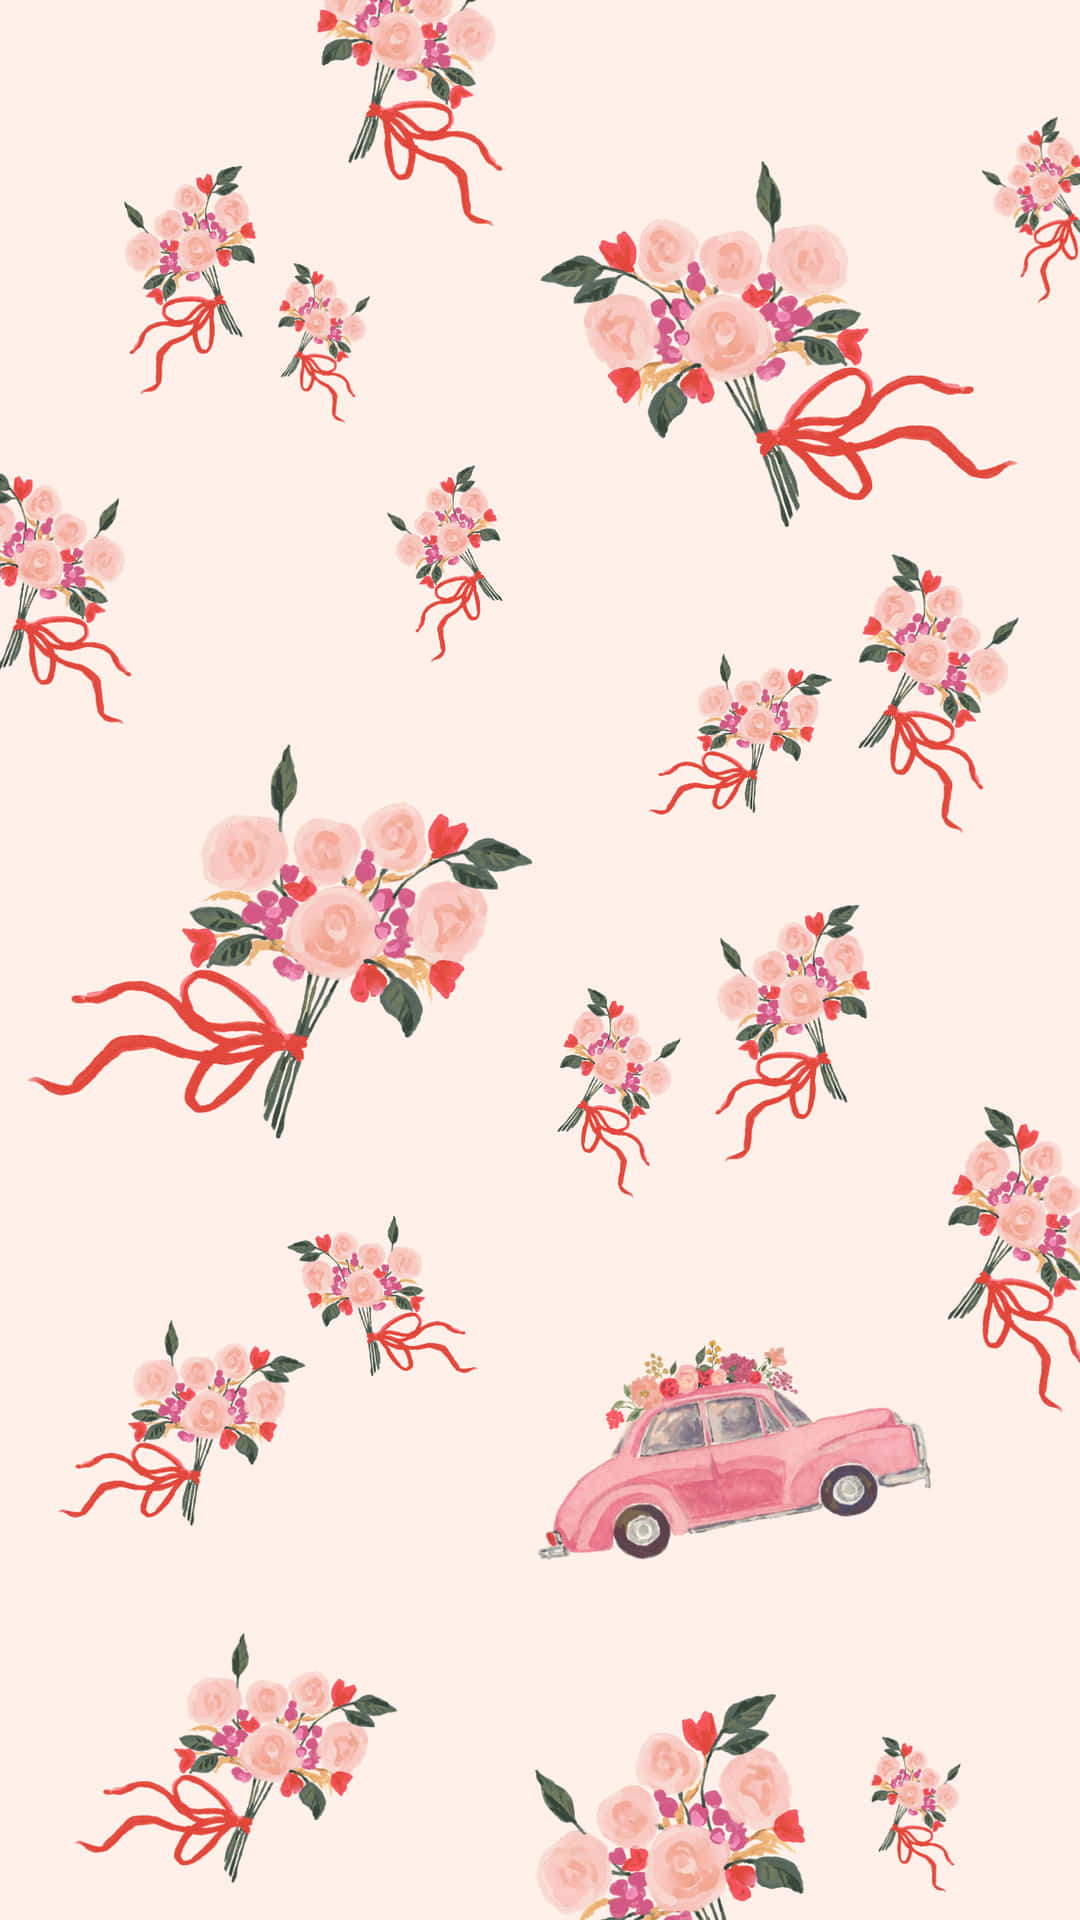 Roses Bouquet And Car Aesthetic Valentine's Day Wallpaper